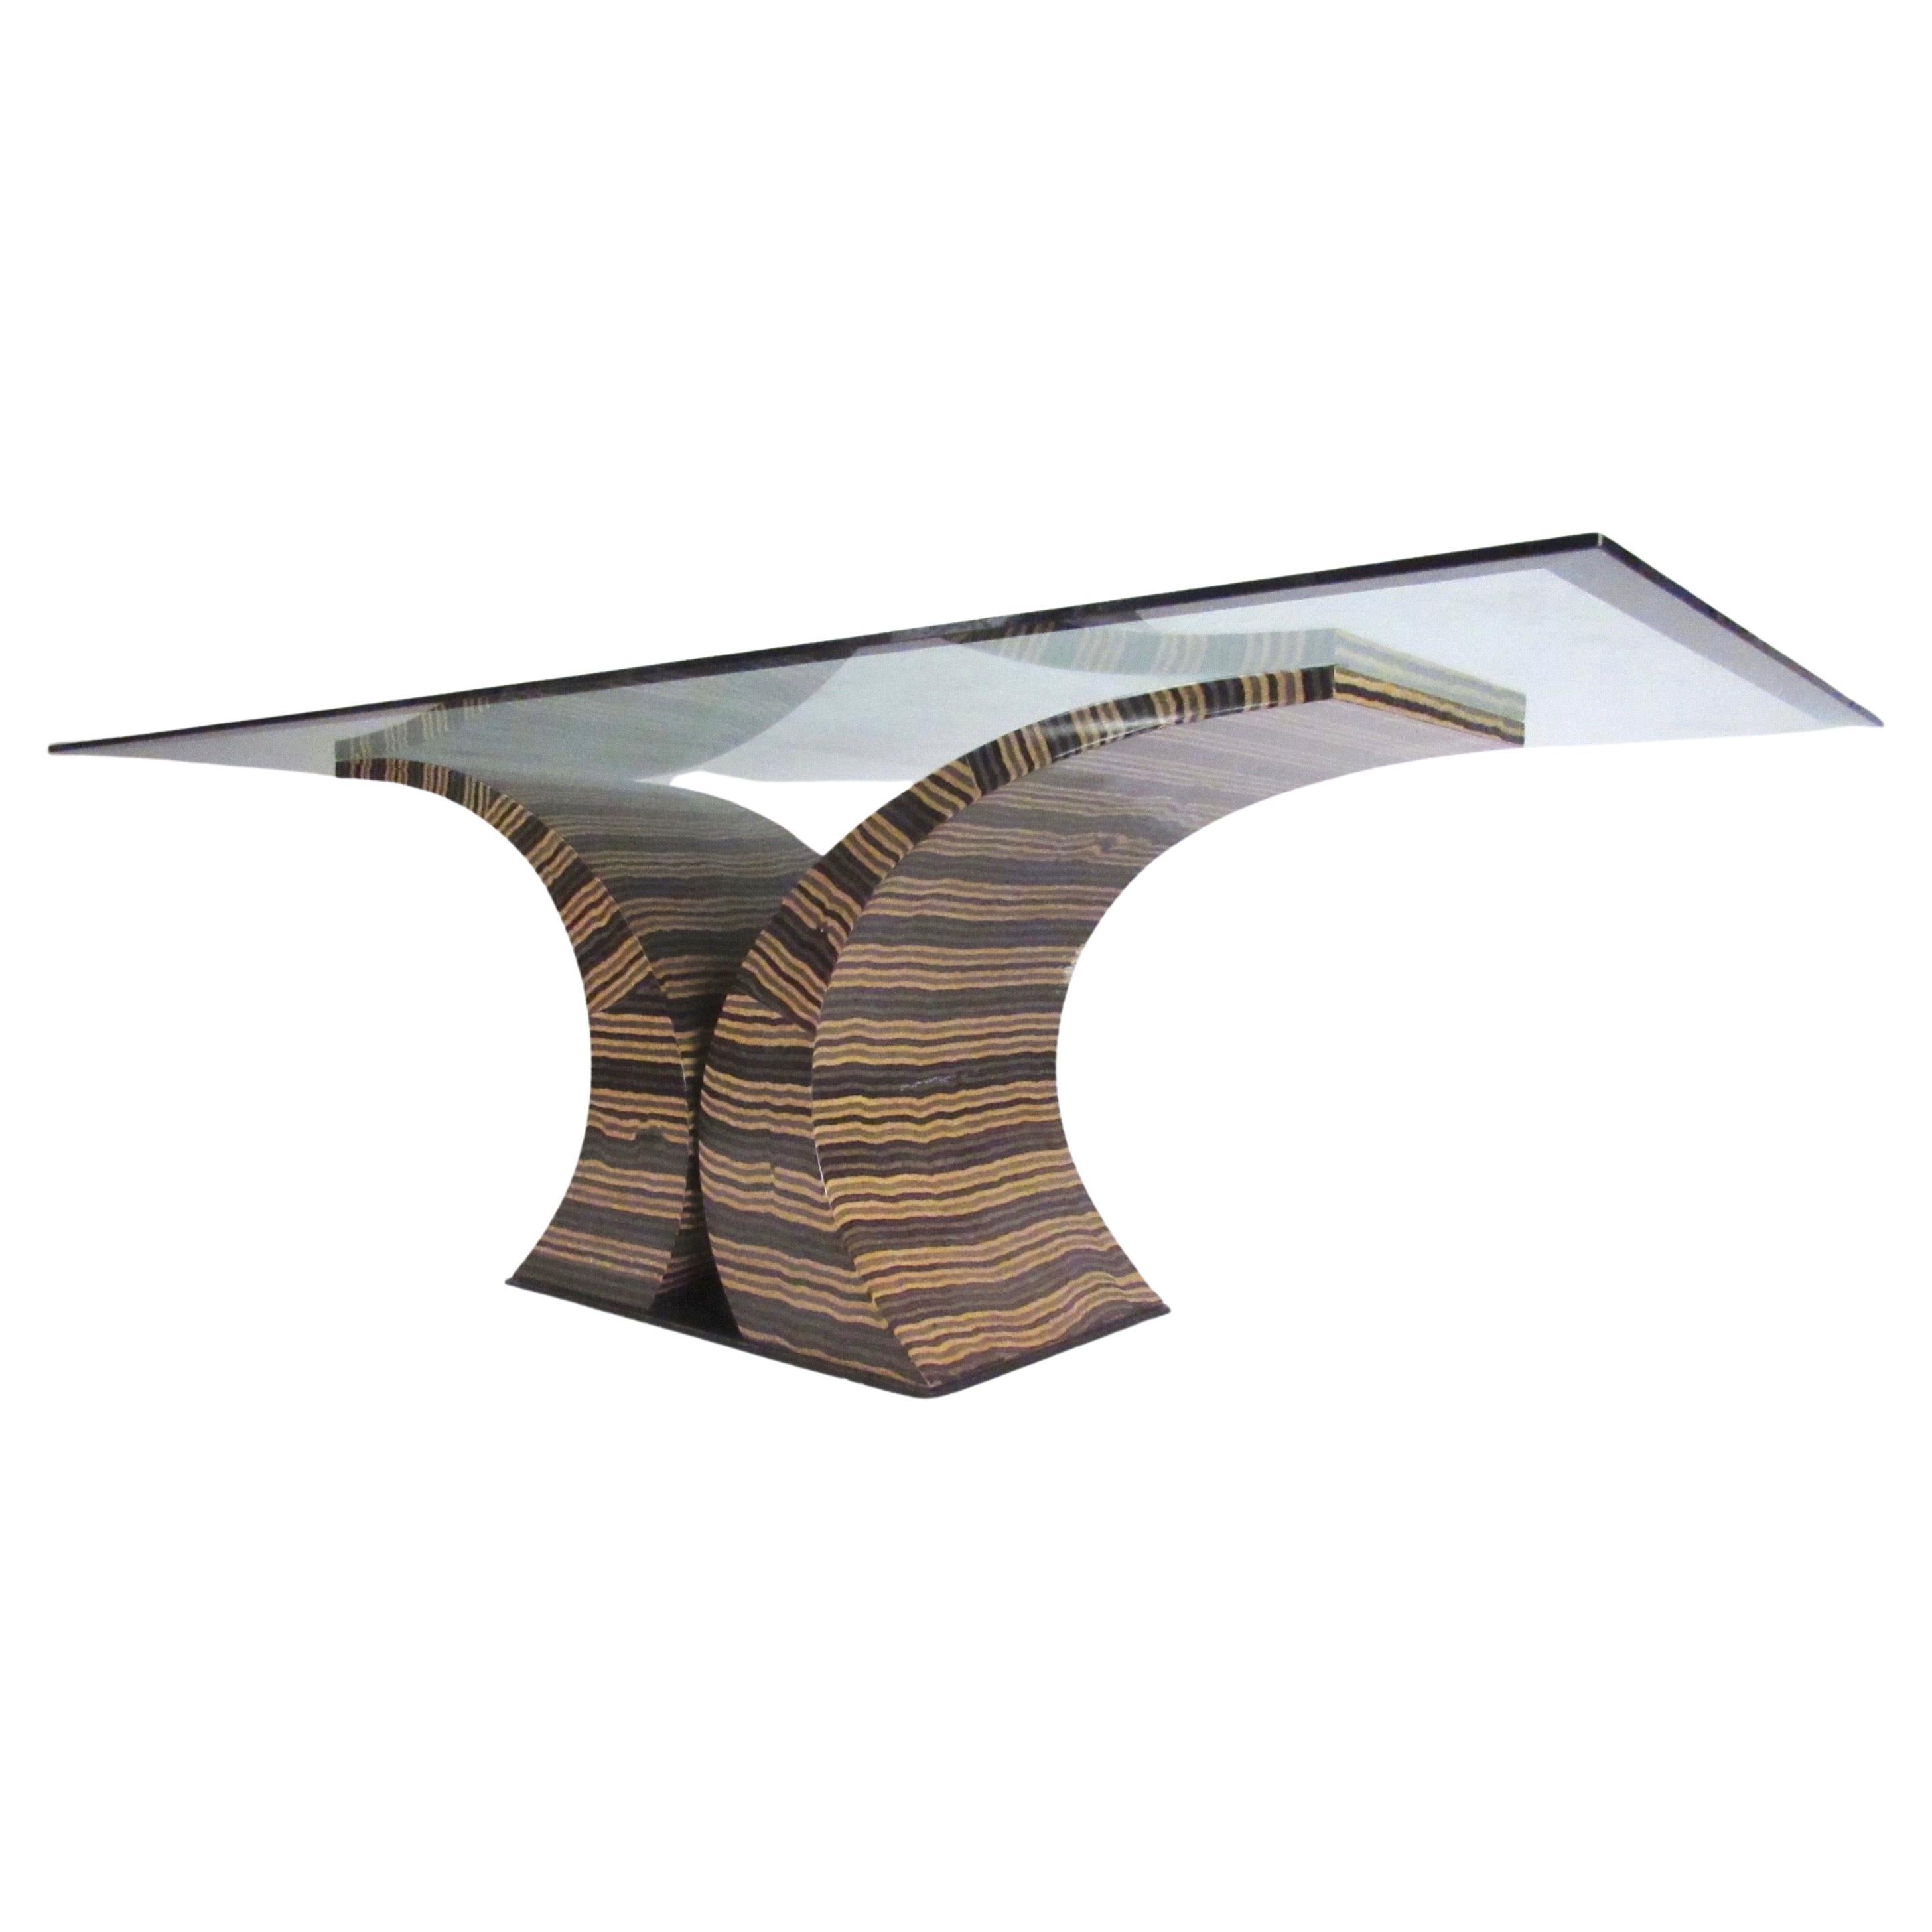 Impressive Decorator Style Dining Table For Sale